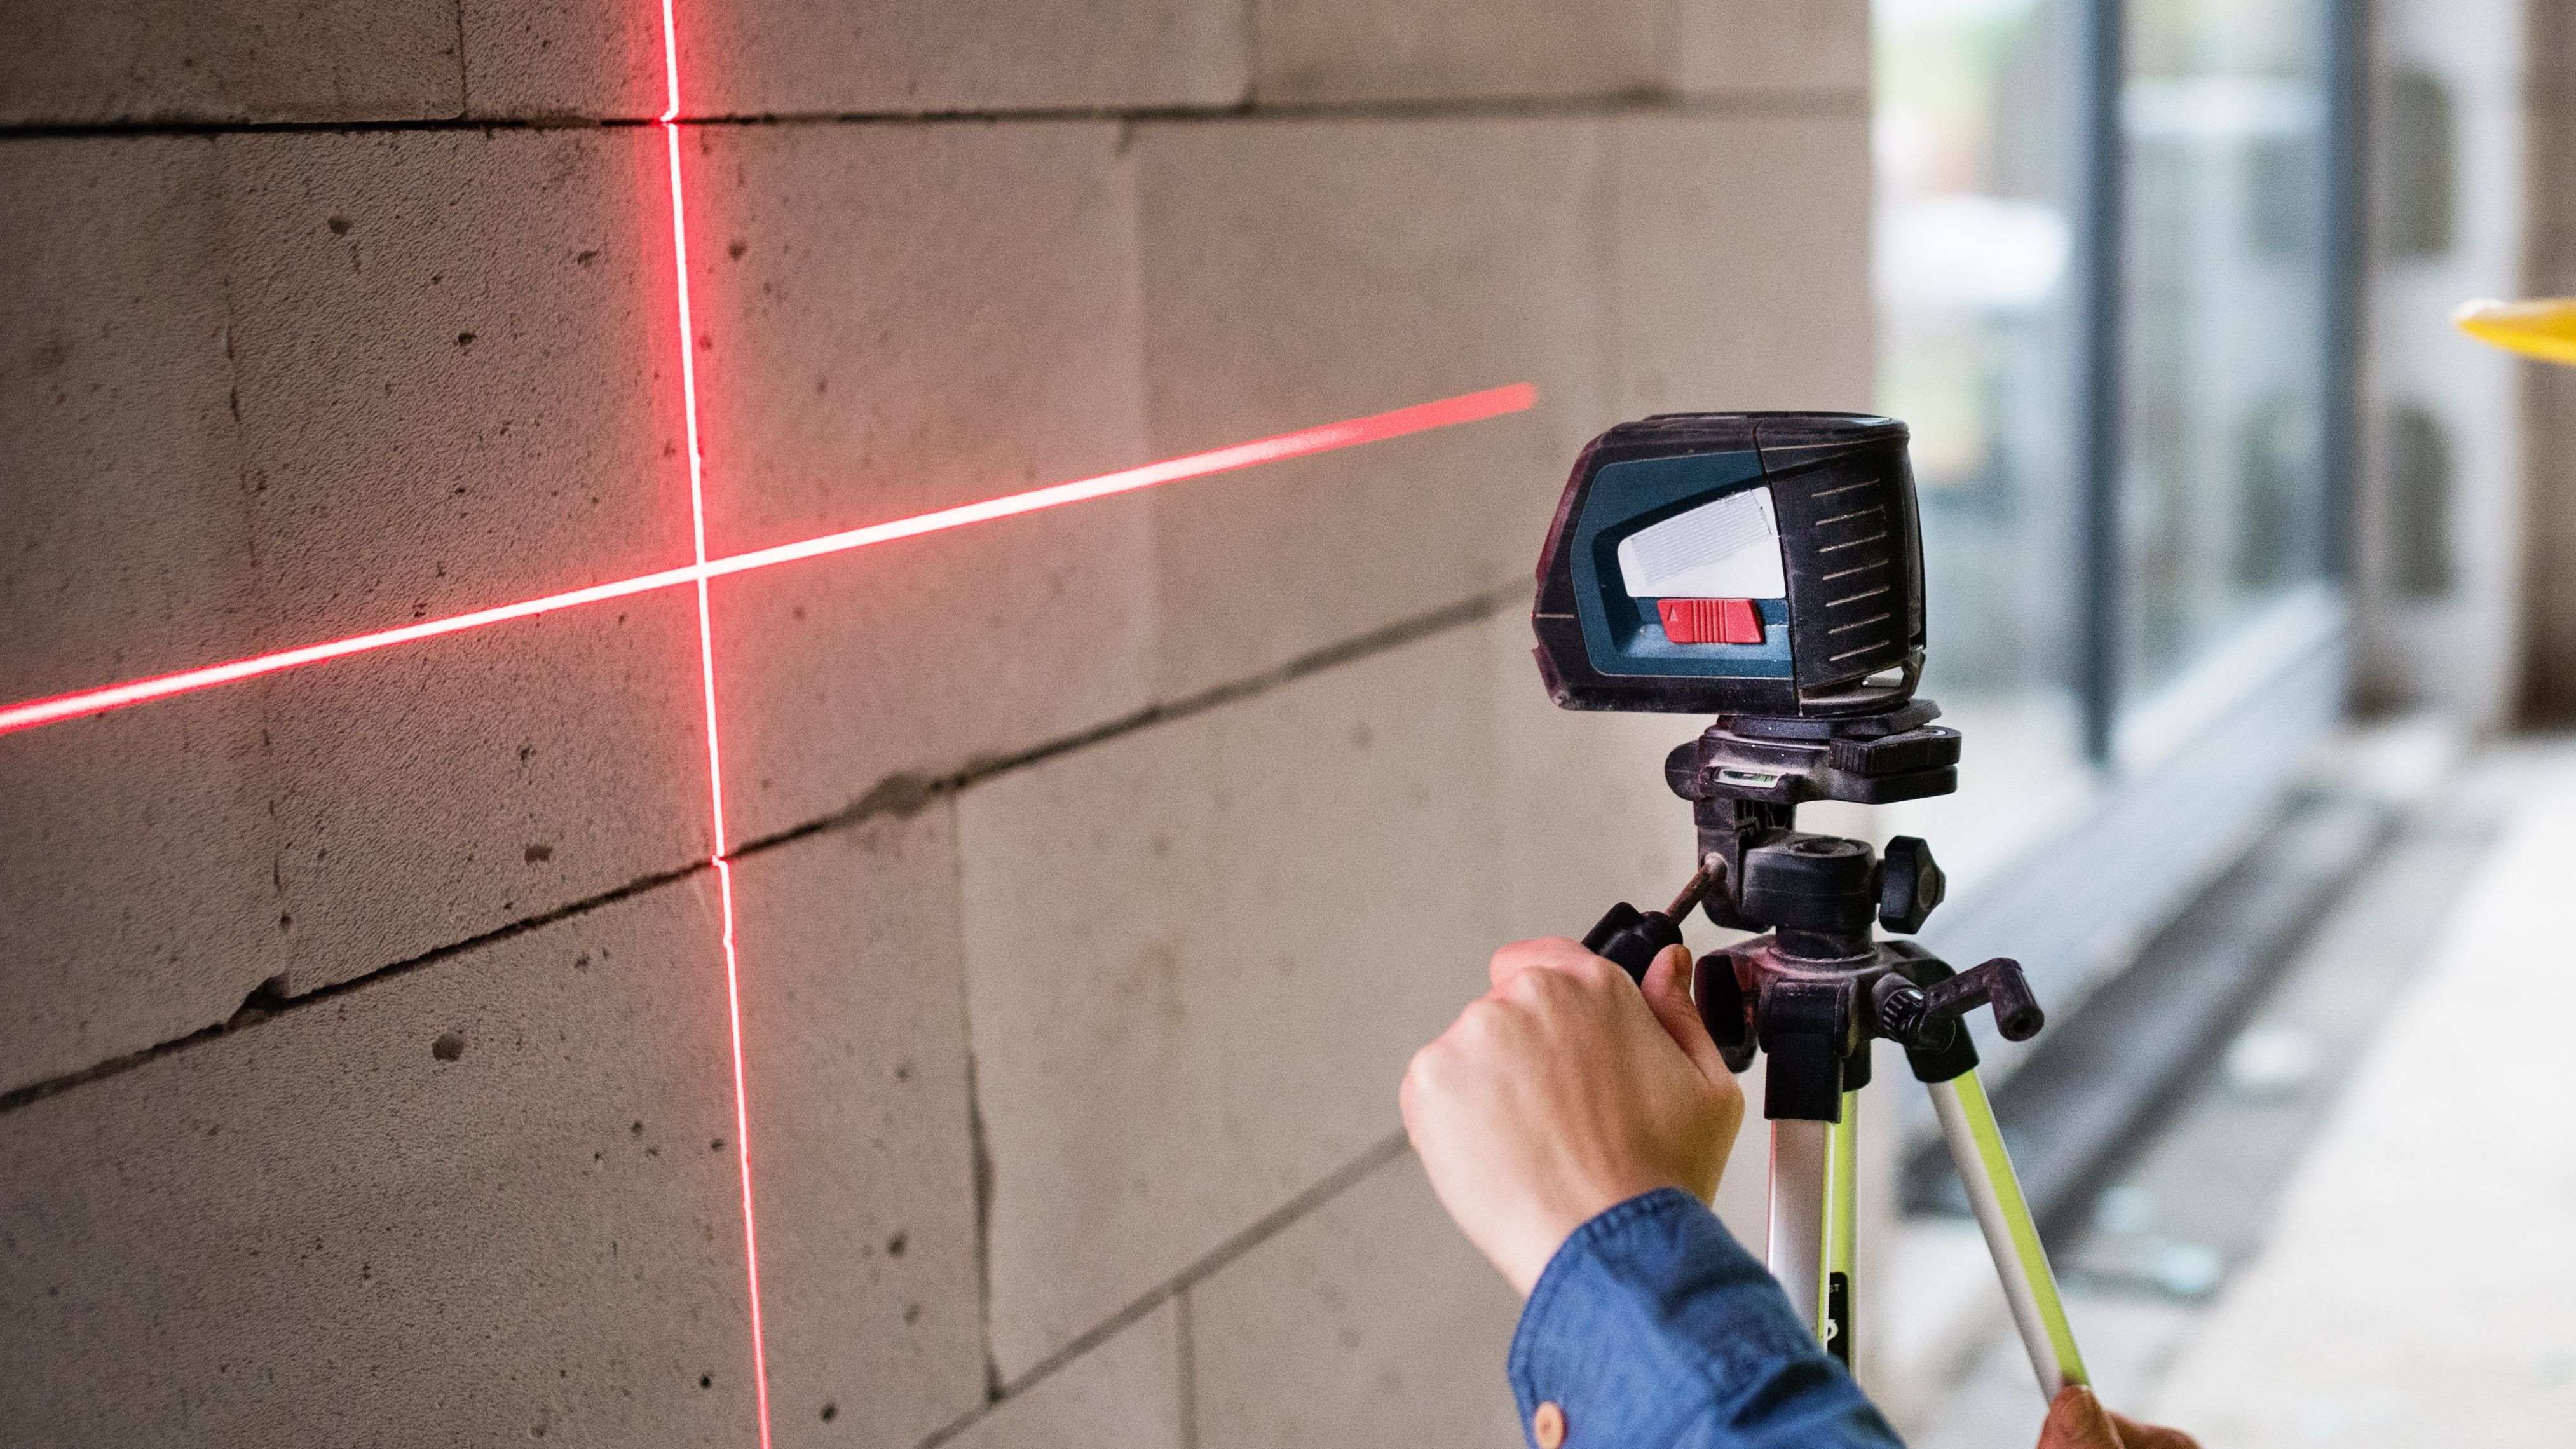 Laser level buying guide